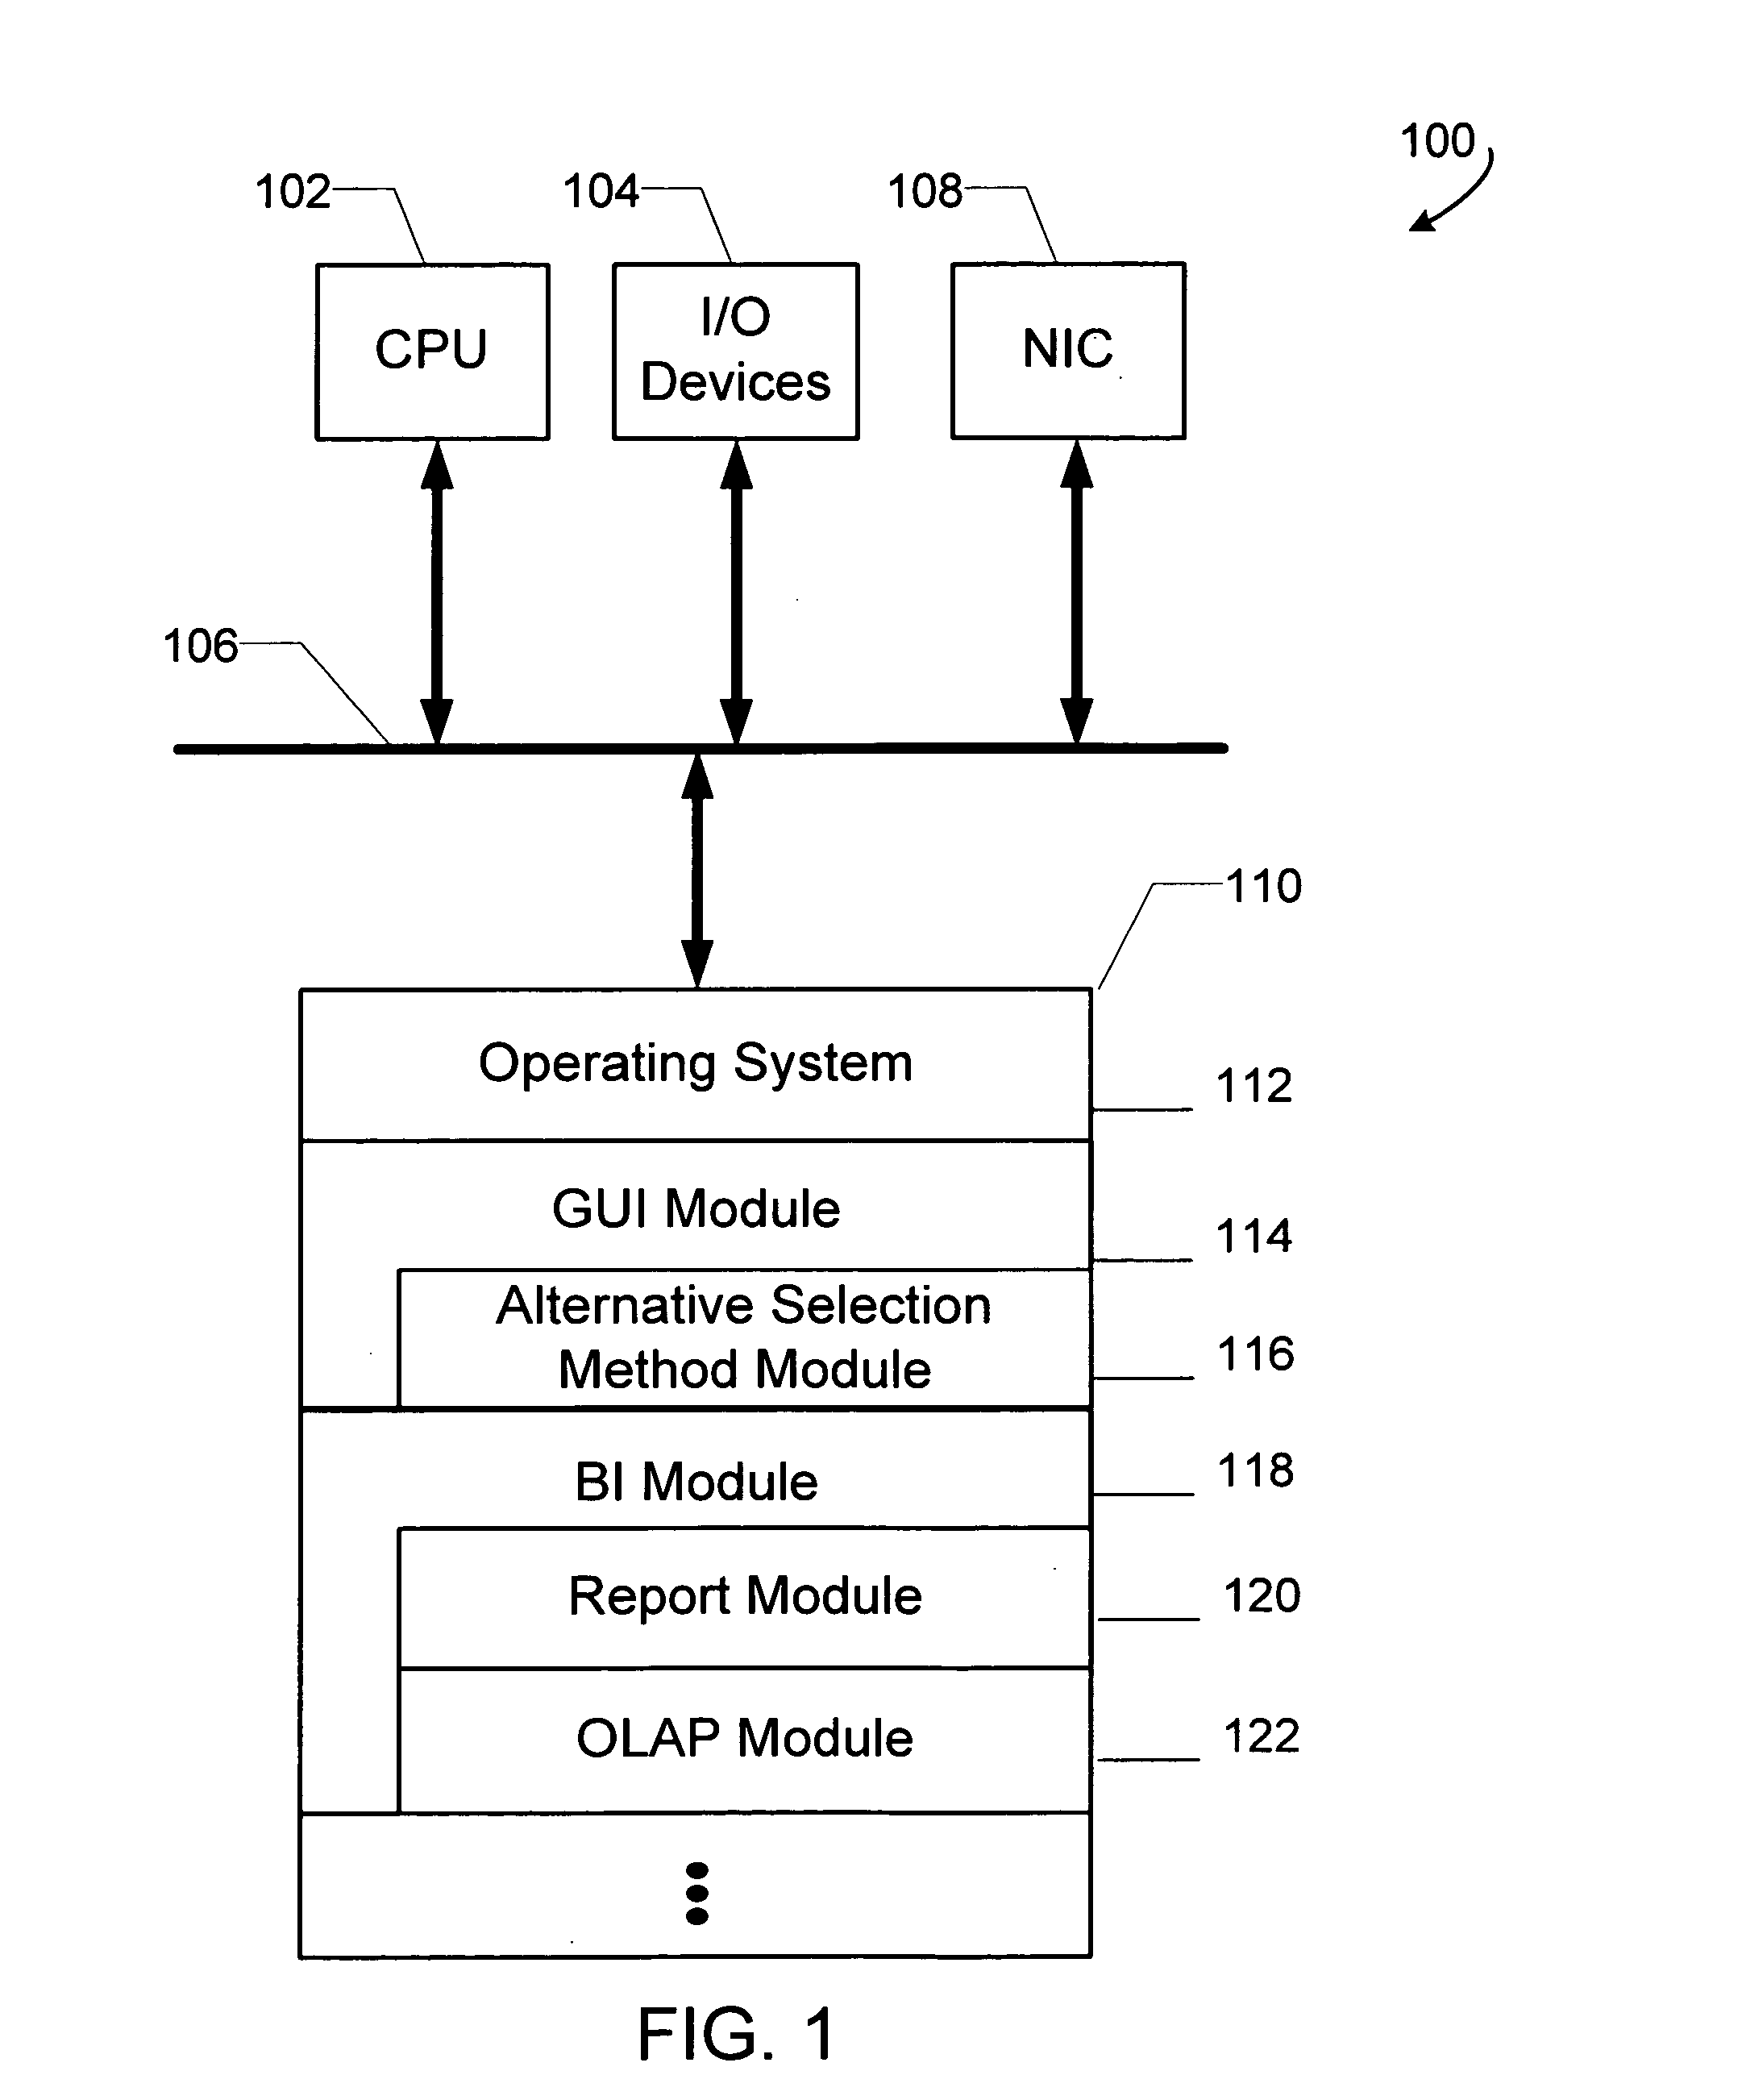 Apparatus and method for selecting multiple items in a graphical user interface